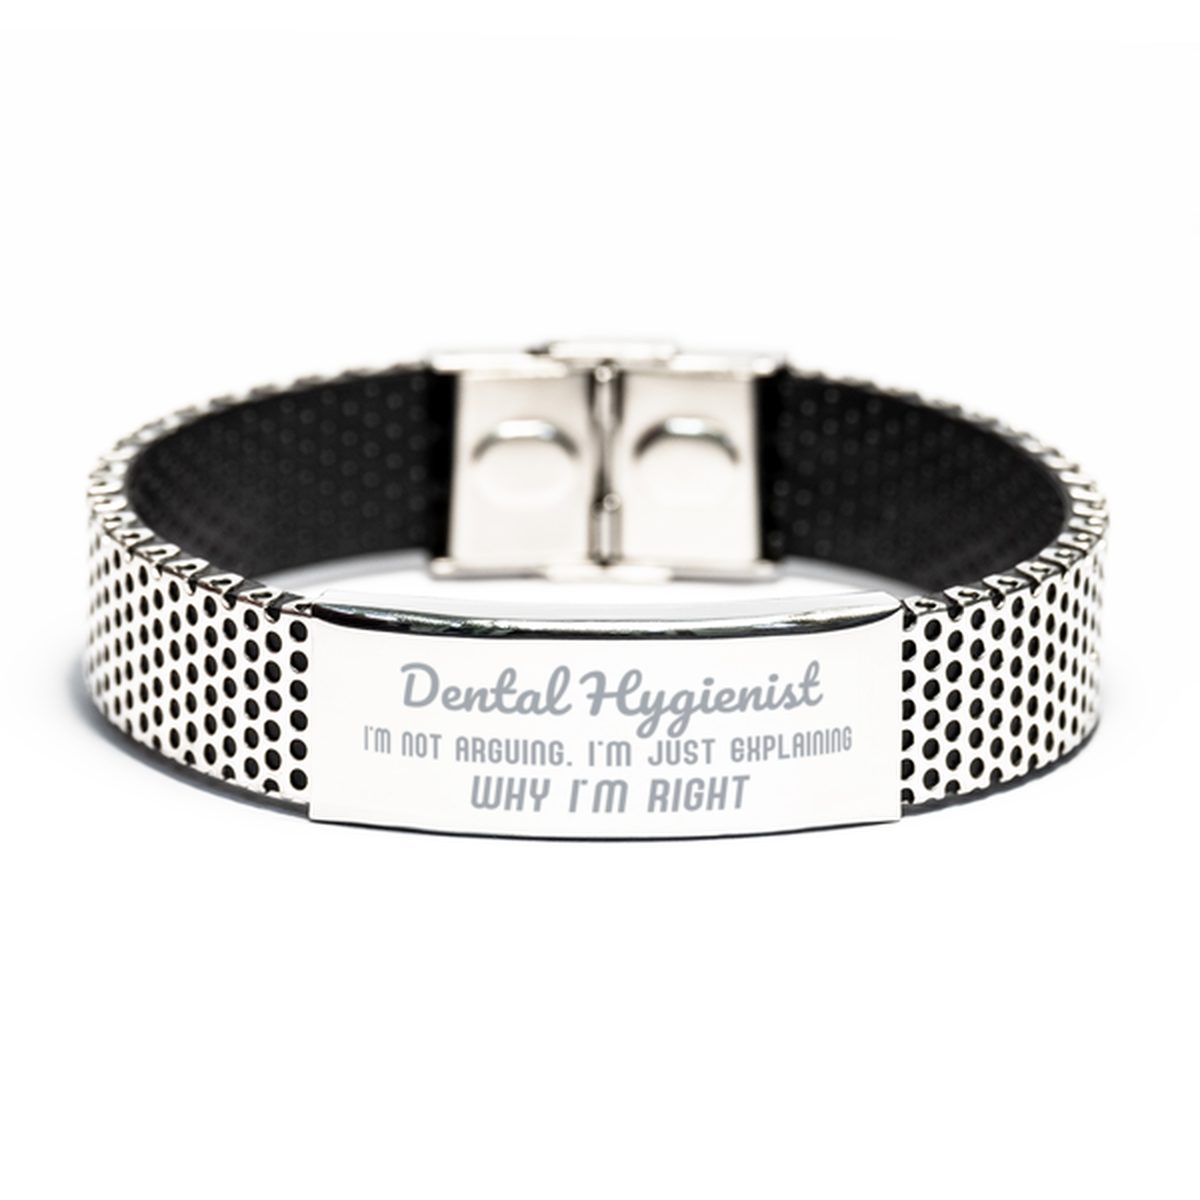 Dental Hygienist I'm not Arguing. I'm Just Explaining Why I'm RIGHT Stainless Steel Bracelet, Funny Saying Quote Dental Hygienist Gifts For Dental Hygienist Graduation Birthday Christmas Gifts for Men Women Coworker